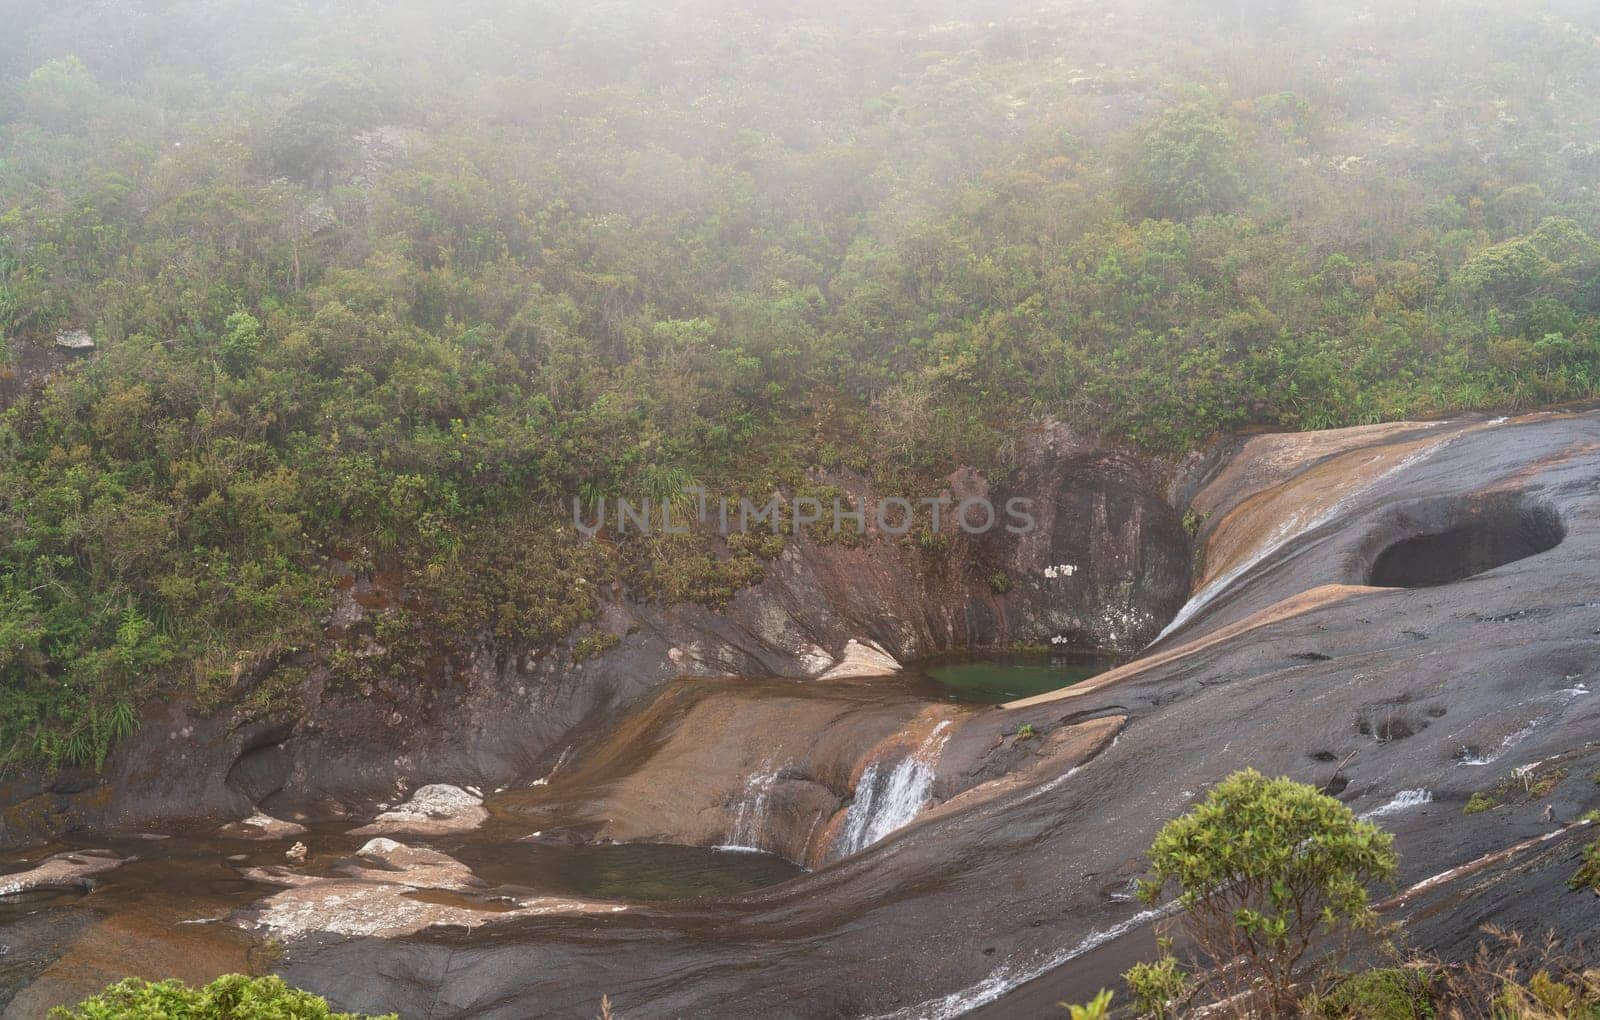 Spectacular colored pools formed by the solid rock in the high jungle river basin, surrounded by a mystical mist due to the humid forest.